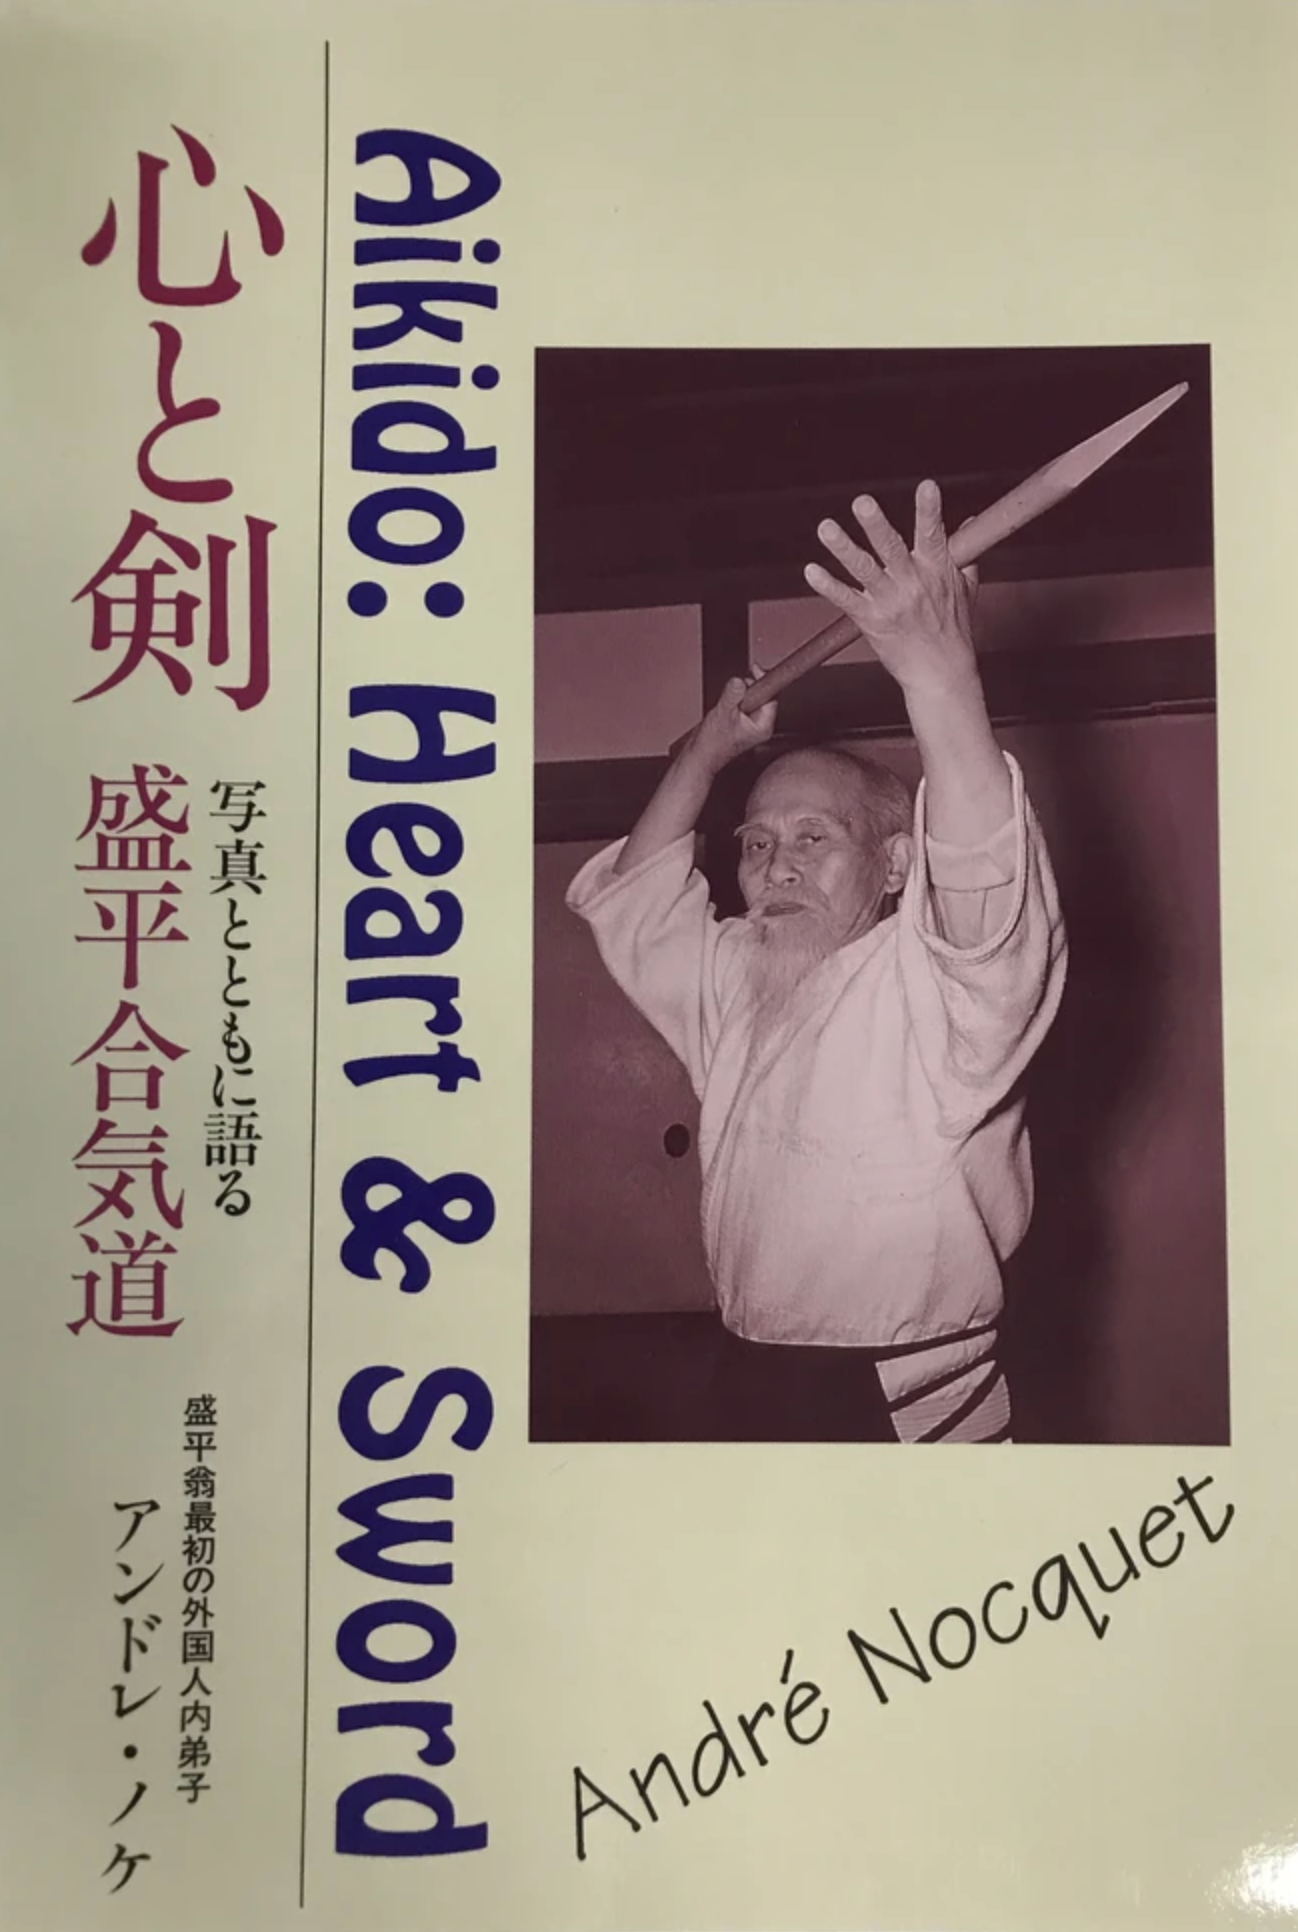 Aikido: Heart & Sword Book by André Nocquet - Budovideos Inc